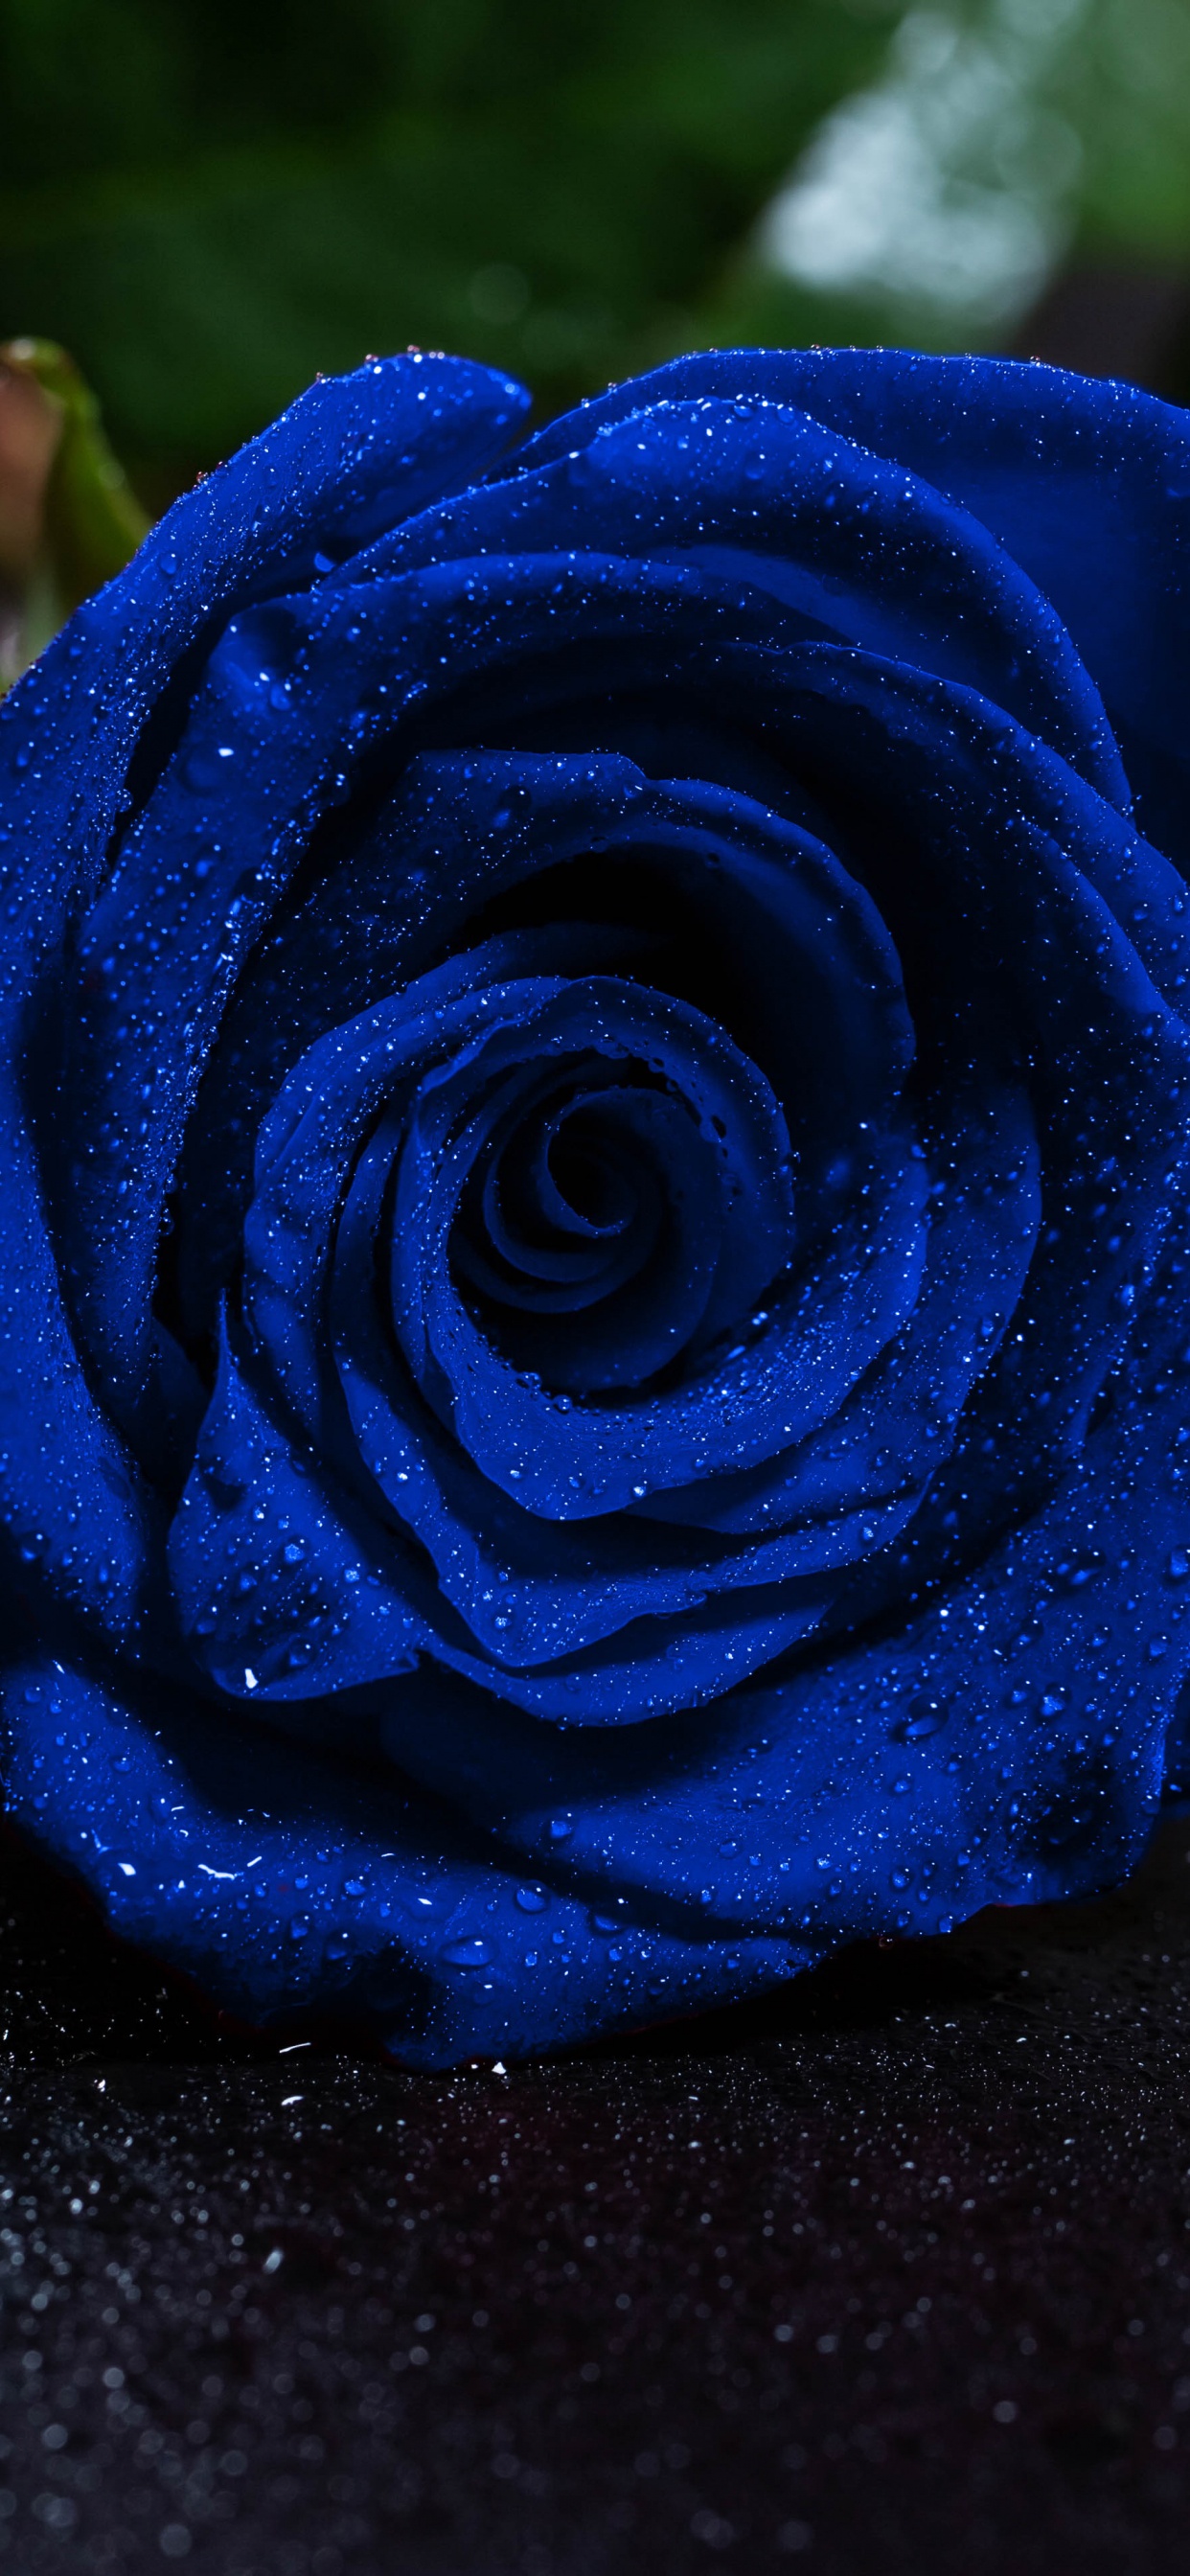 Blue Rose on Black Surface. Wallpaper in 1242x2688 Resolution